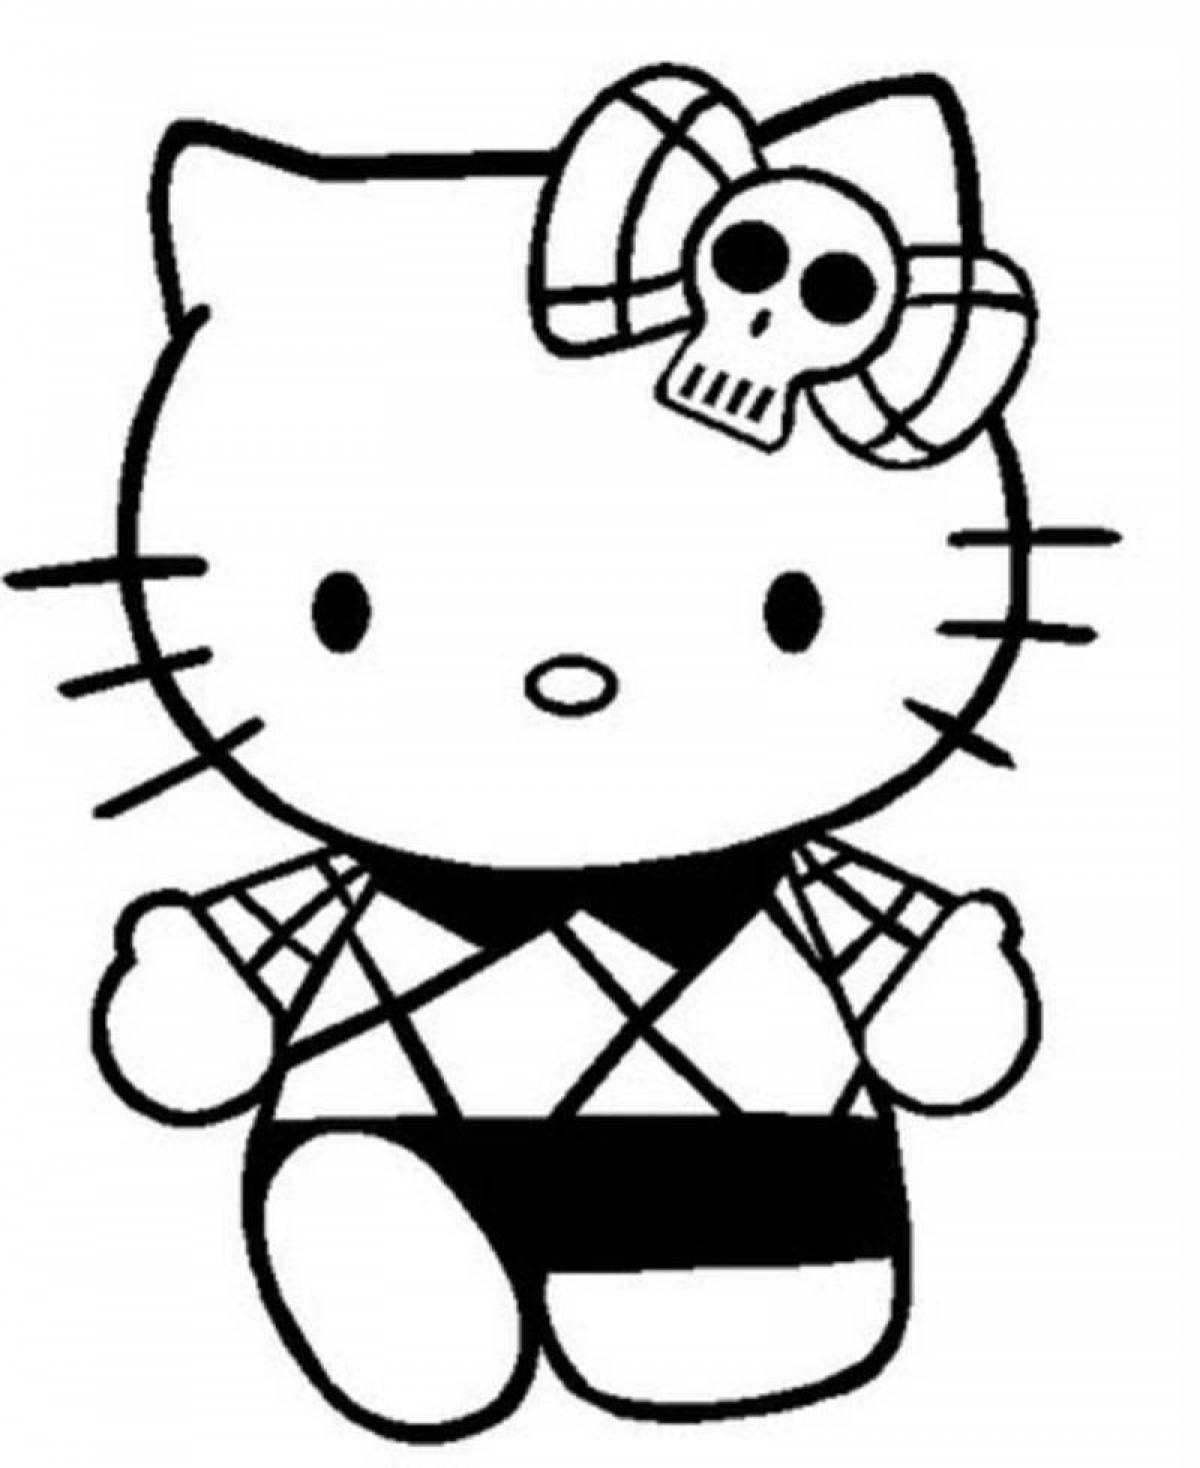 Radiant kuromi and hello kitty coloring page